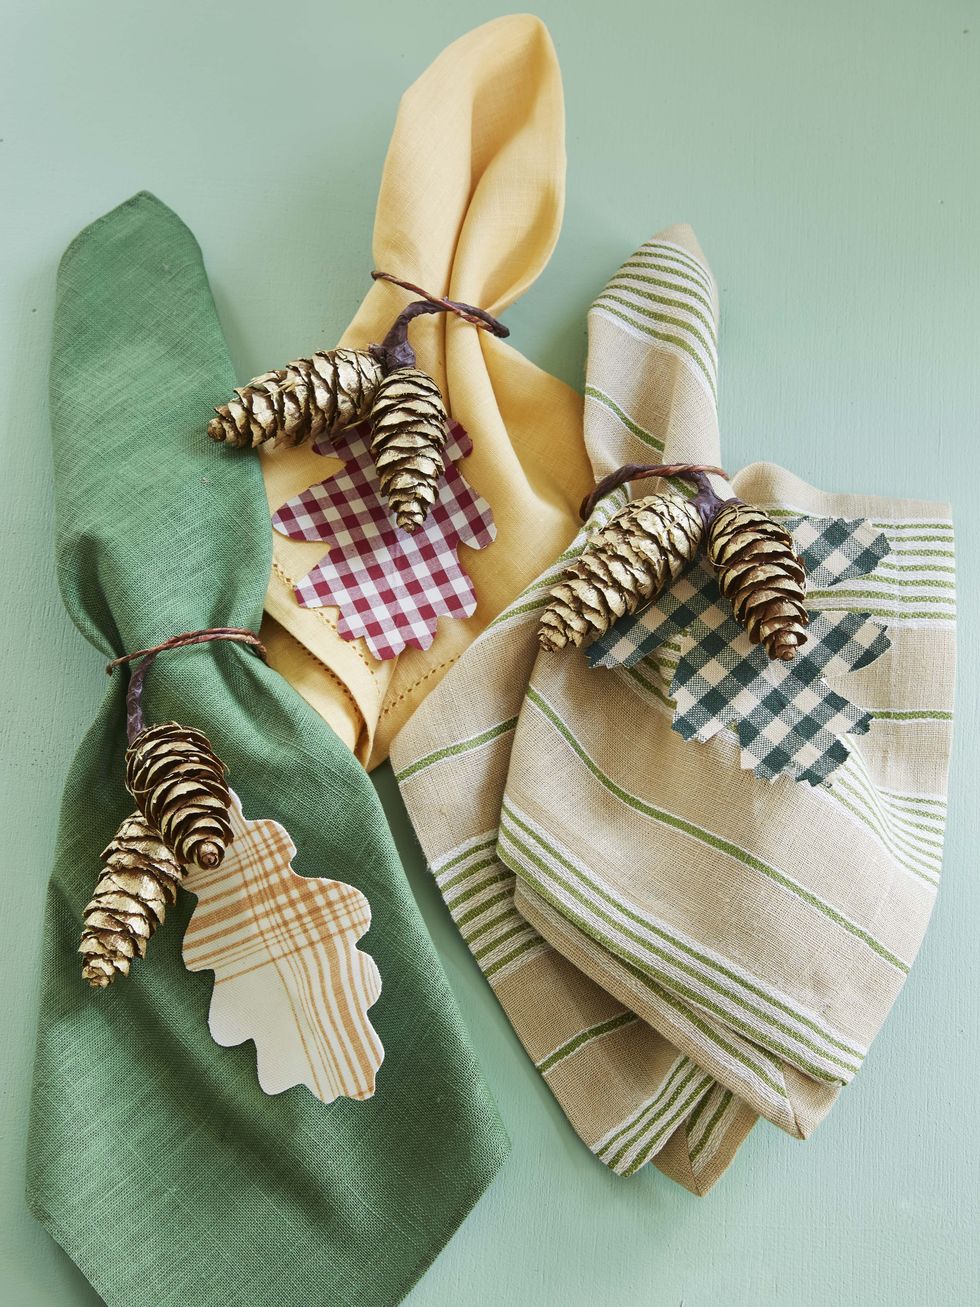 three napkin rings crafted from twine, pinecones, and fall leaf shapes cut from gingham and plaid fabrics